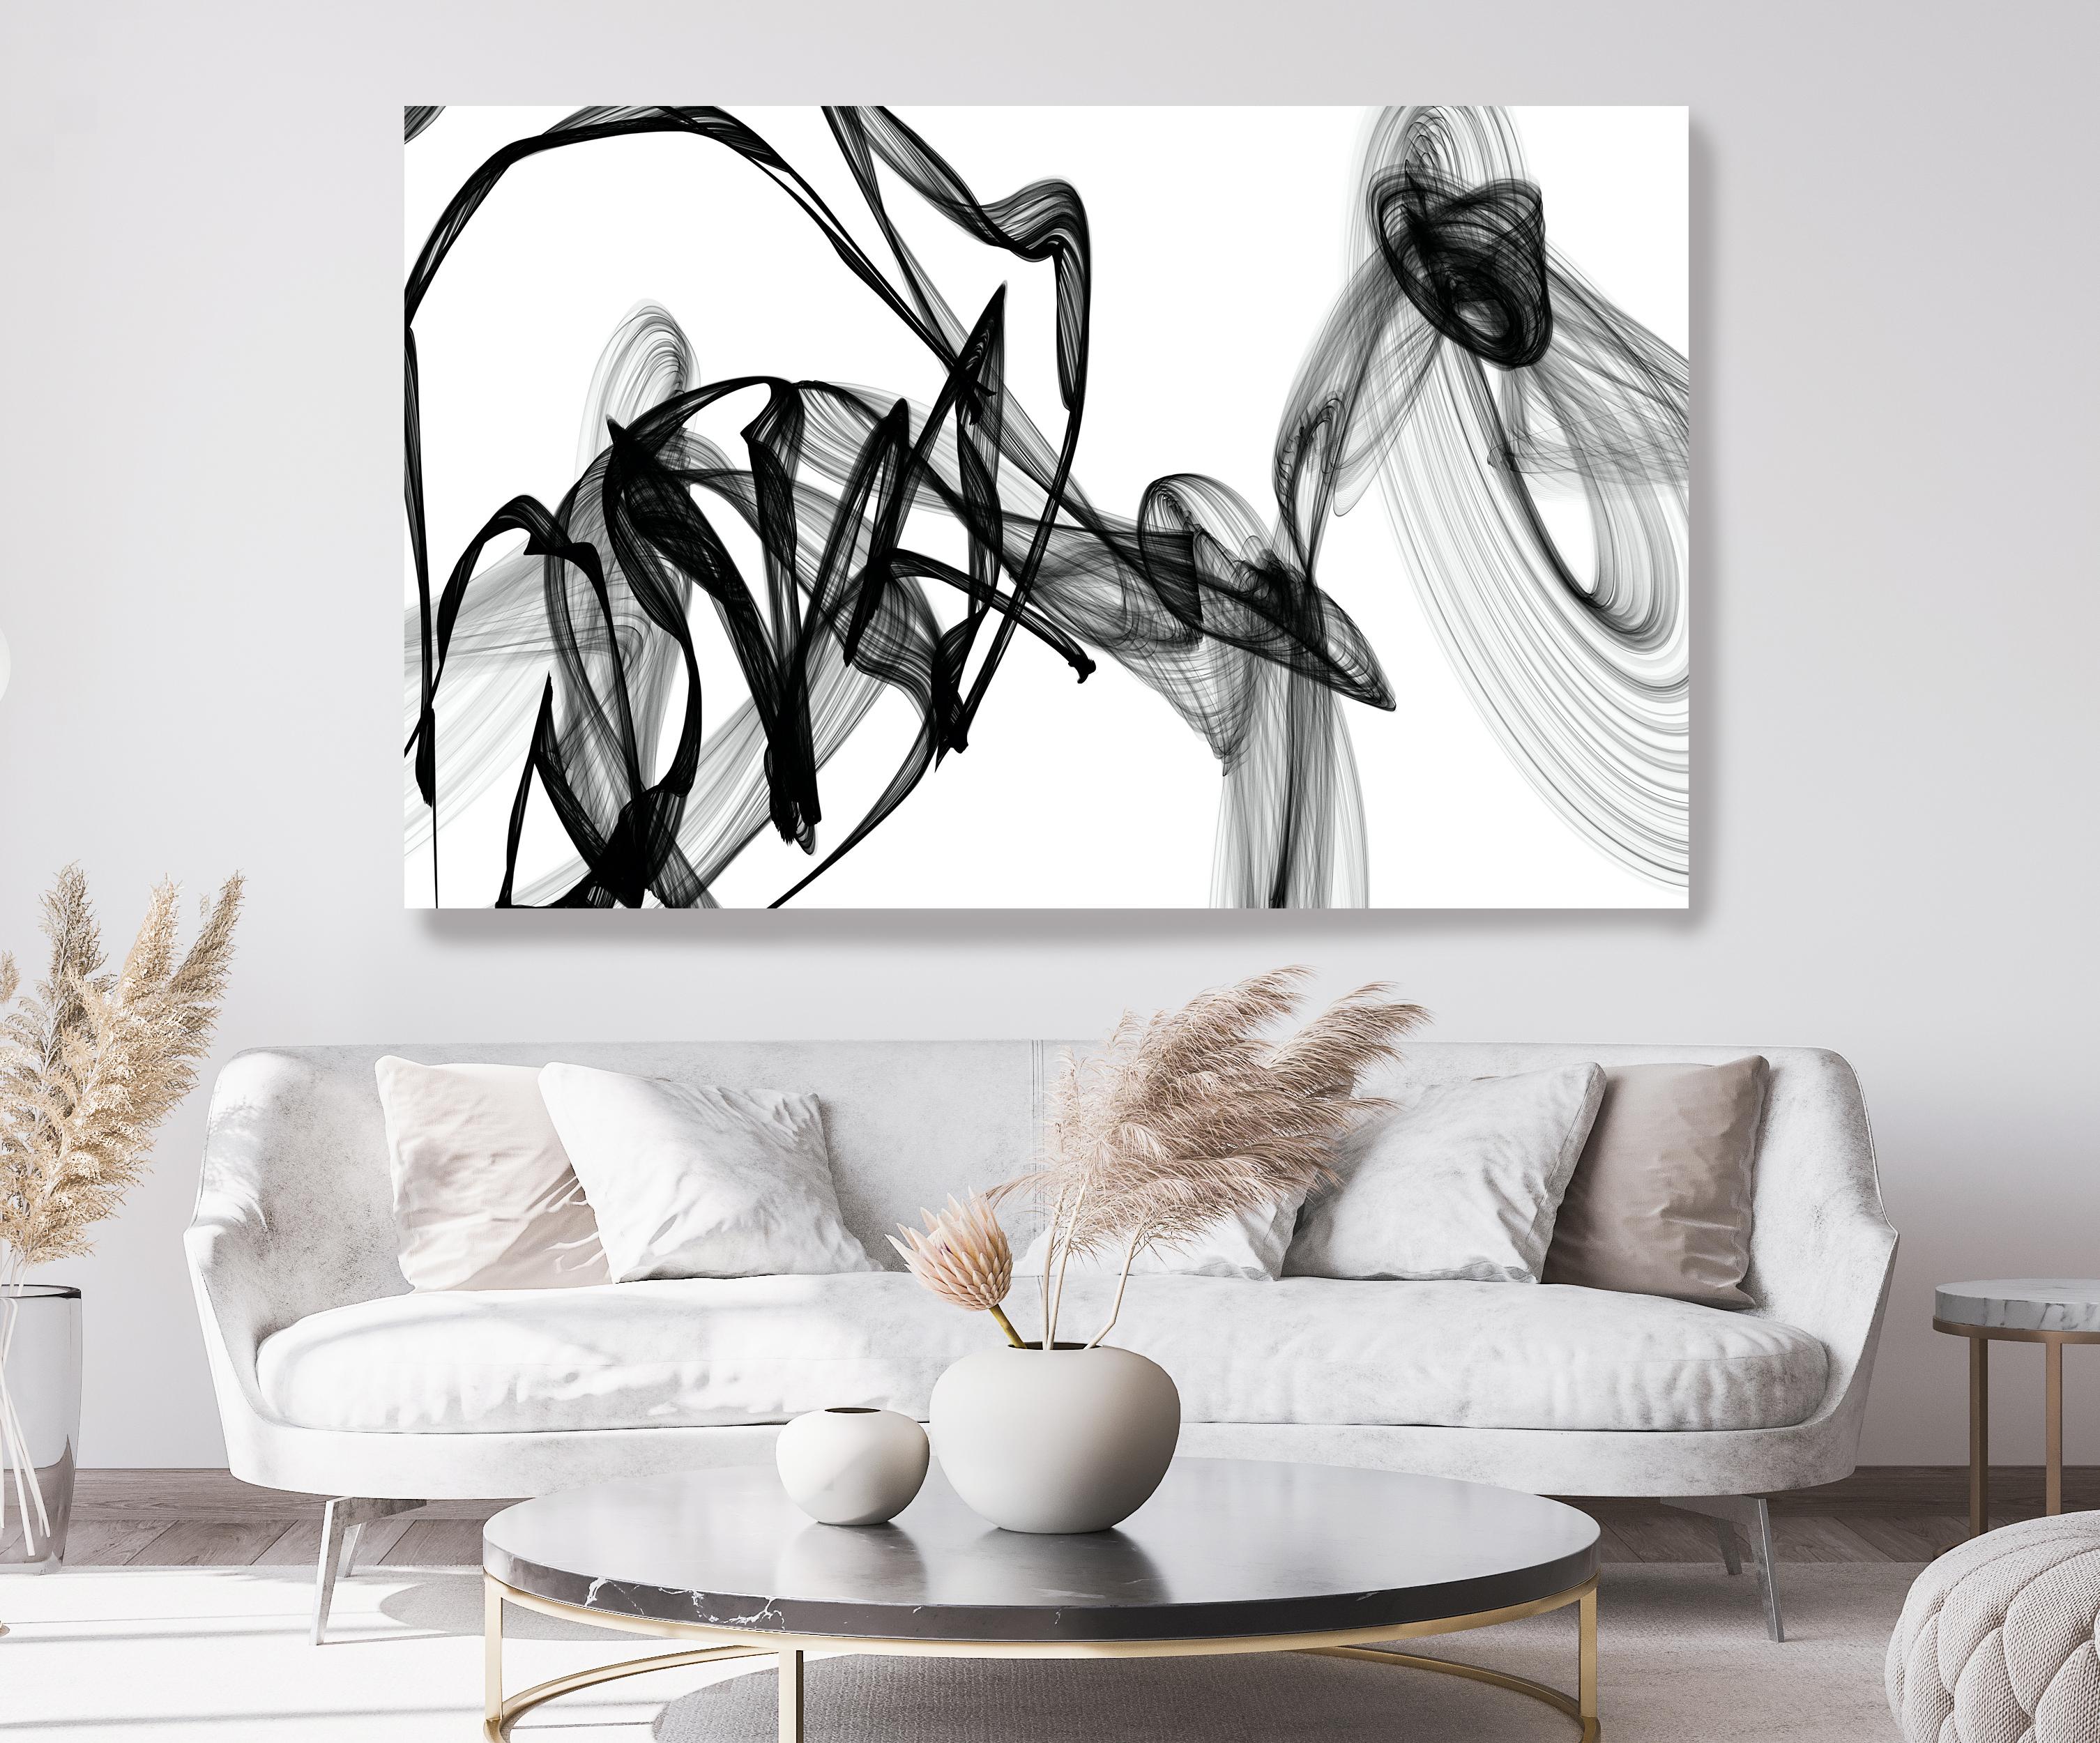 Innovative and Contemporary Original New Media Abstract Black And White Work on Canvas
Minimalist New Media Original Painting on Canvas

Innovative and Contemporary Original New Media Abstract Work on Canvas

Investment Opportunity - Unique -